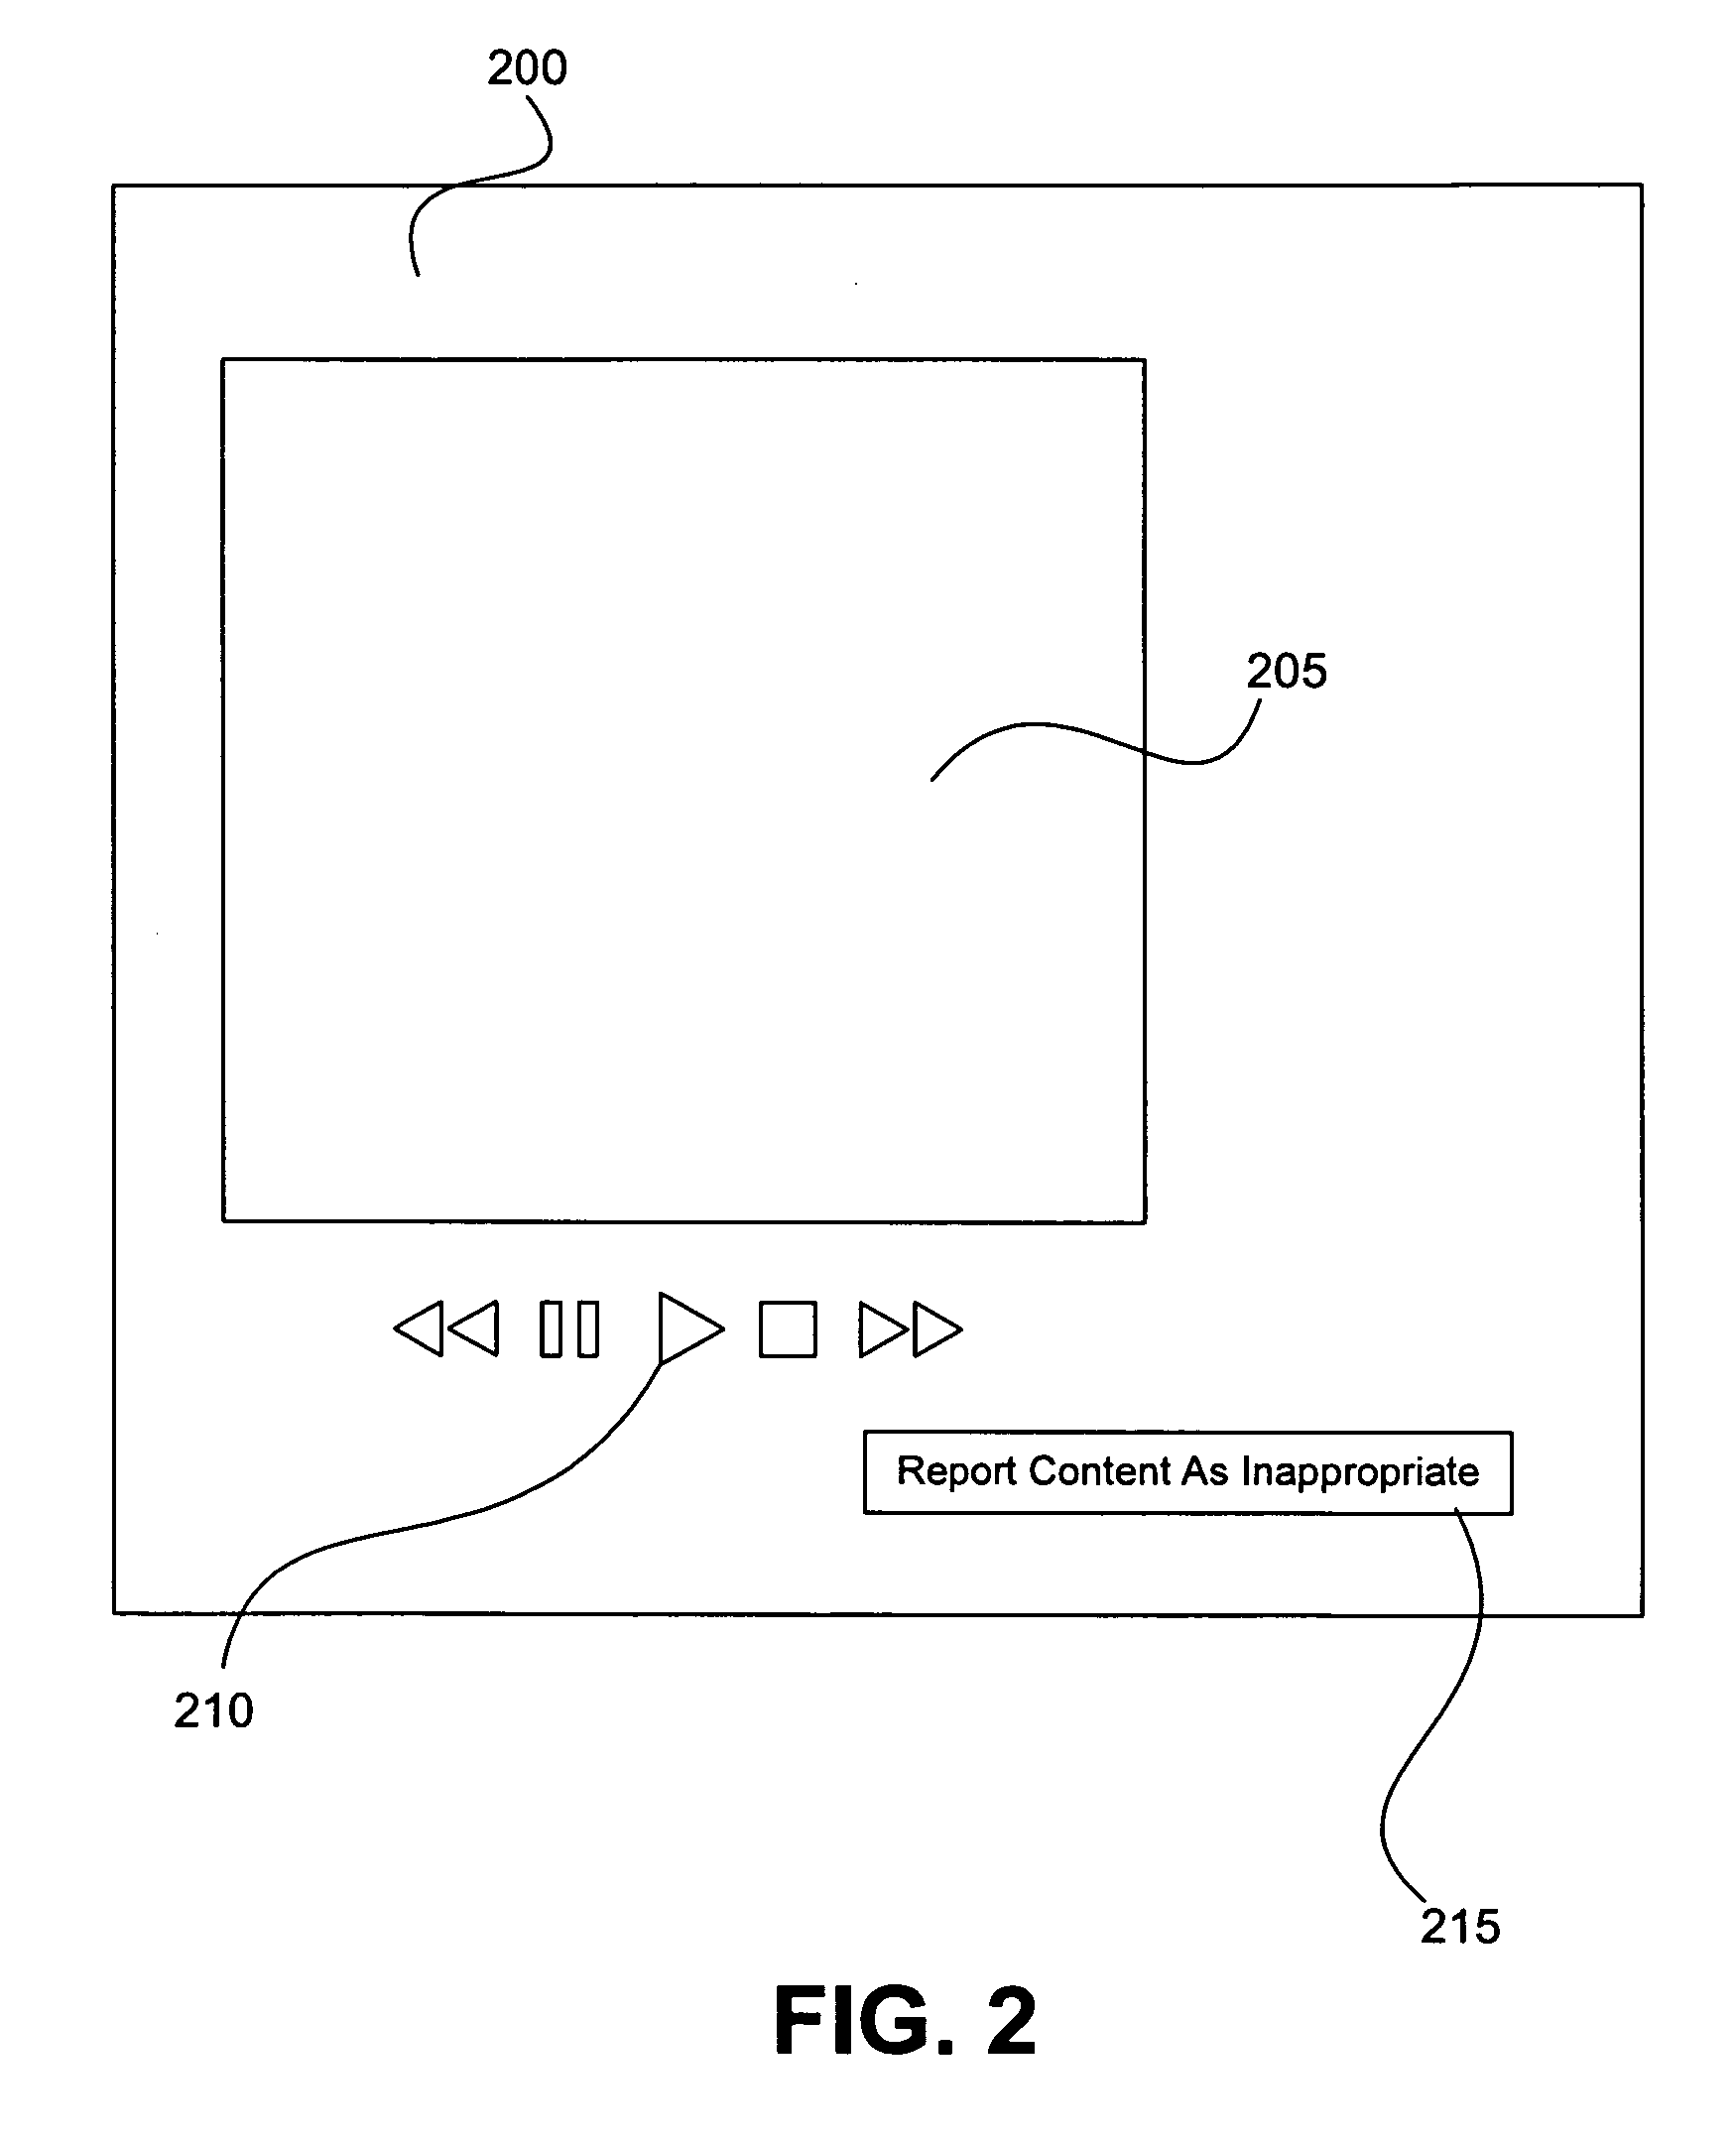 Network Content Objection Handling System and Method